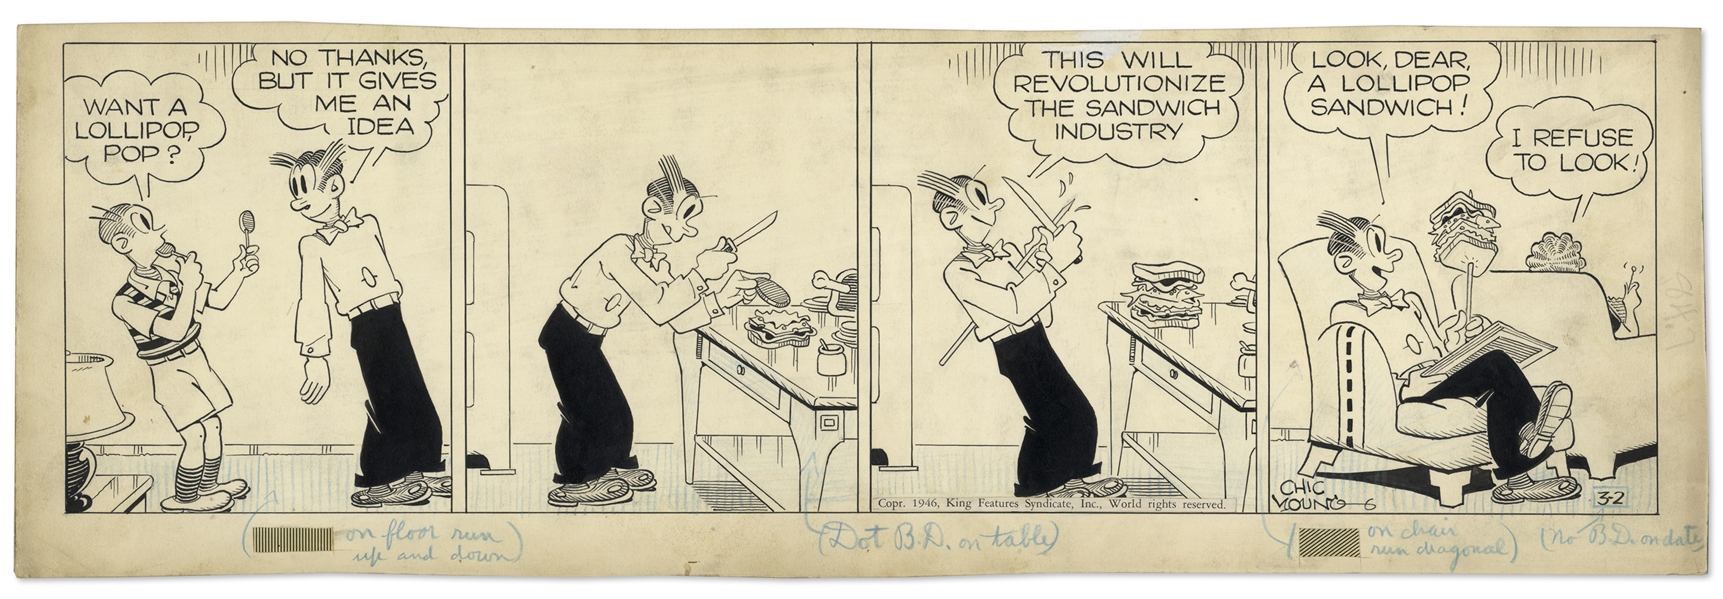 Chic Young Hand-Drawn ''Blondie'' Comic Strip From 1946 Titled ''That's Our Pop!'' -- Starring Dagwood Making One of His Infamous Sandwiches